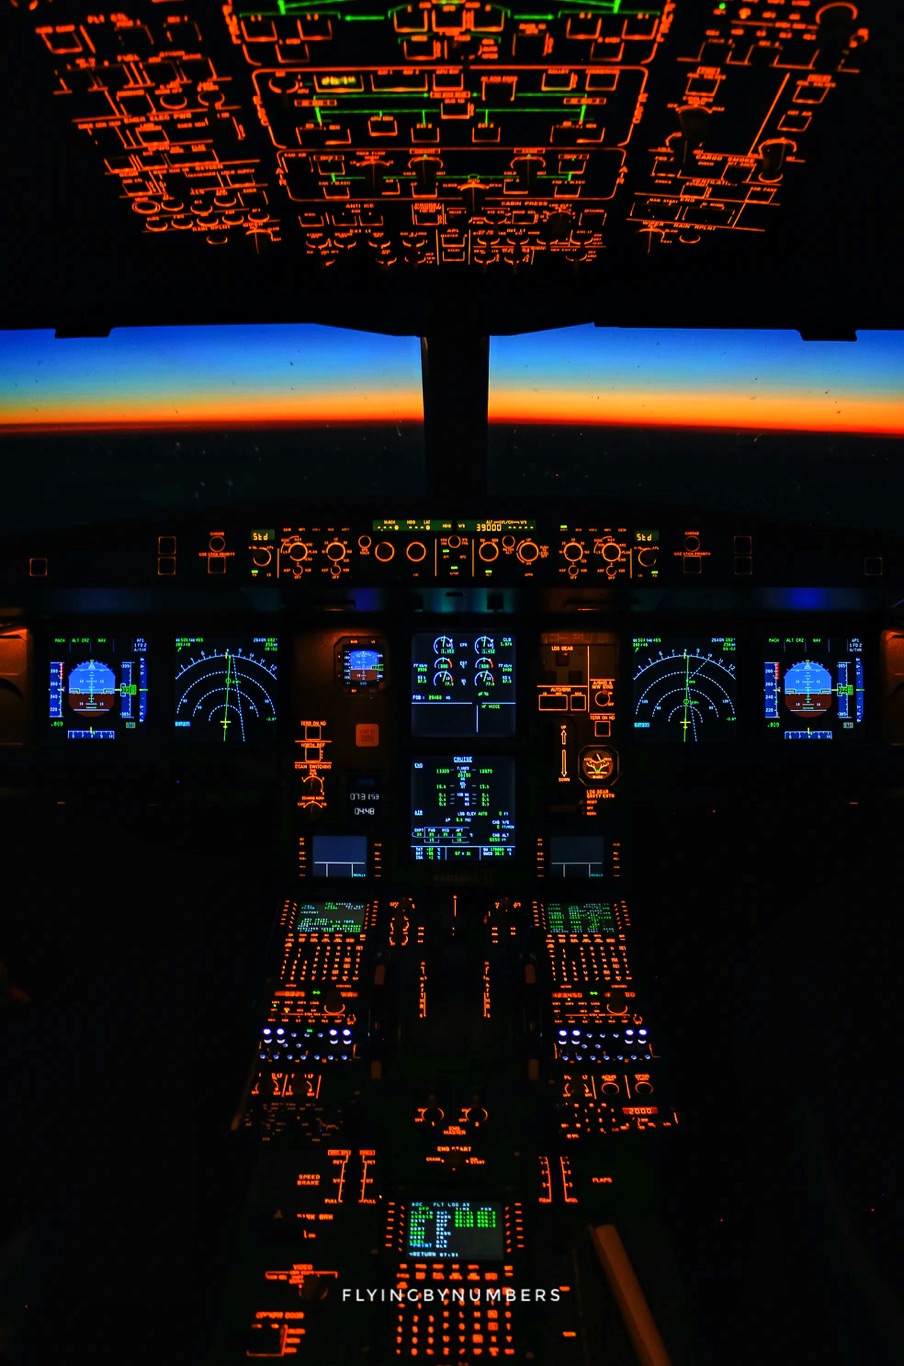 Pilots using autopilot in the cruise 39000ft